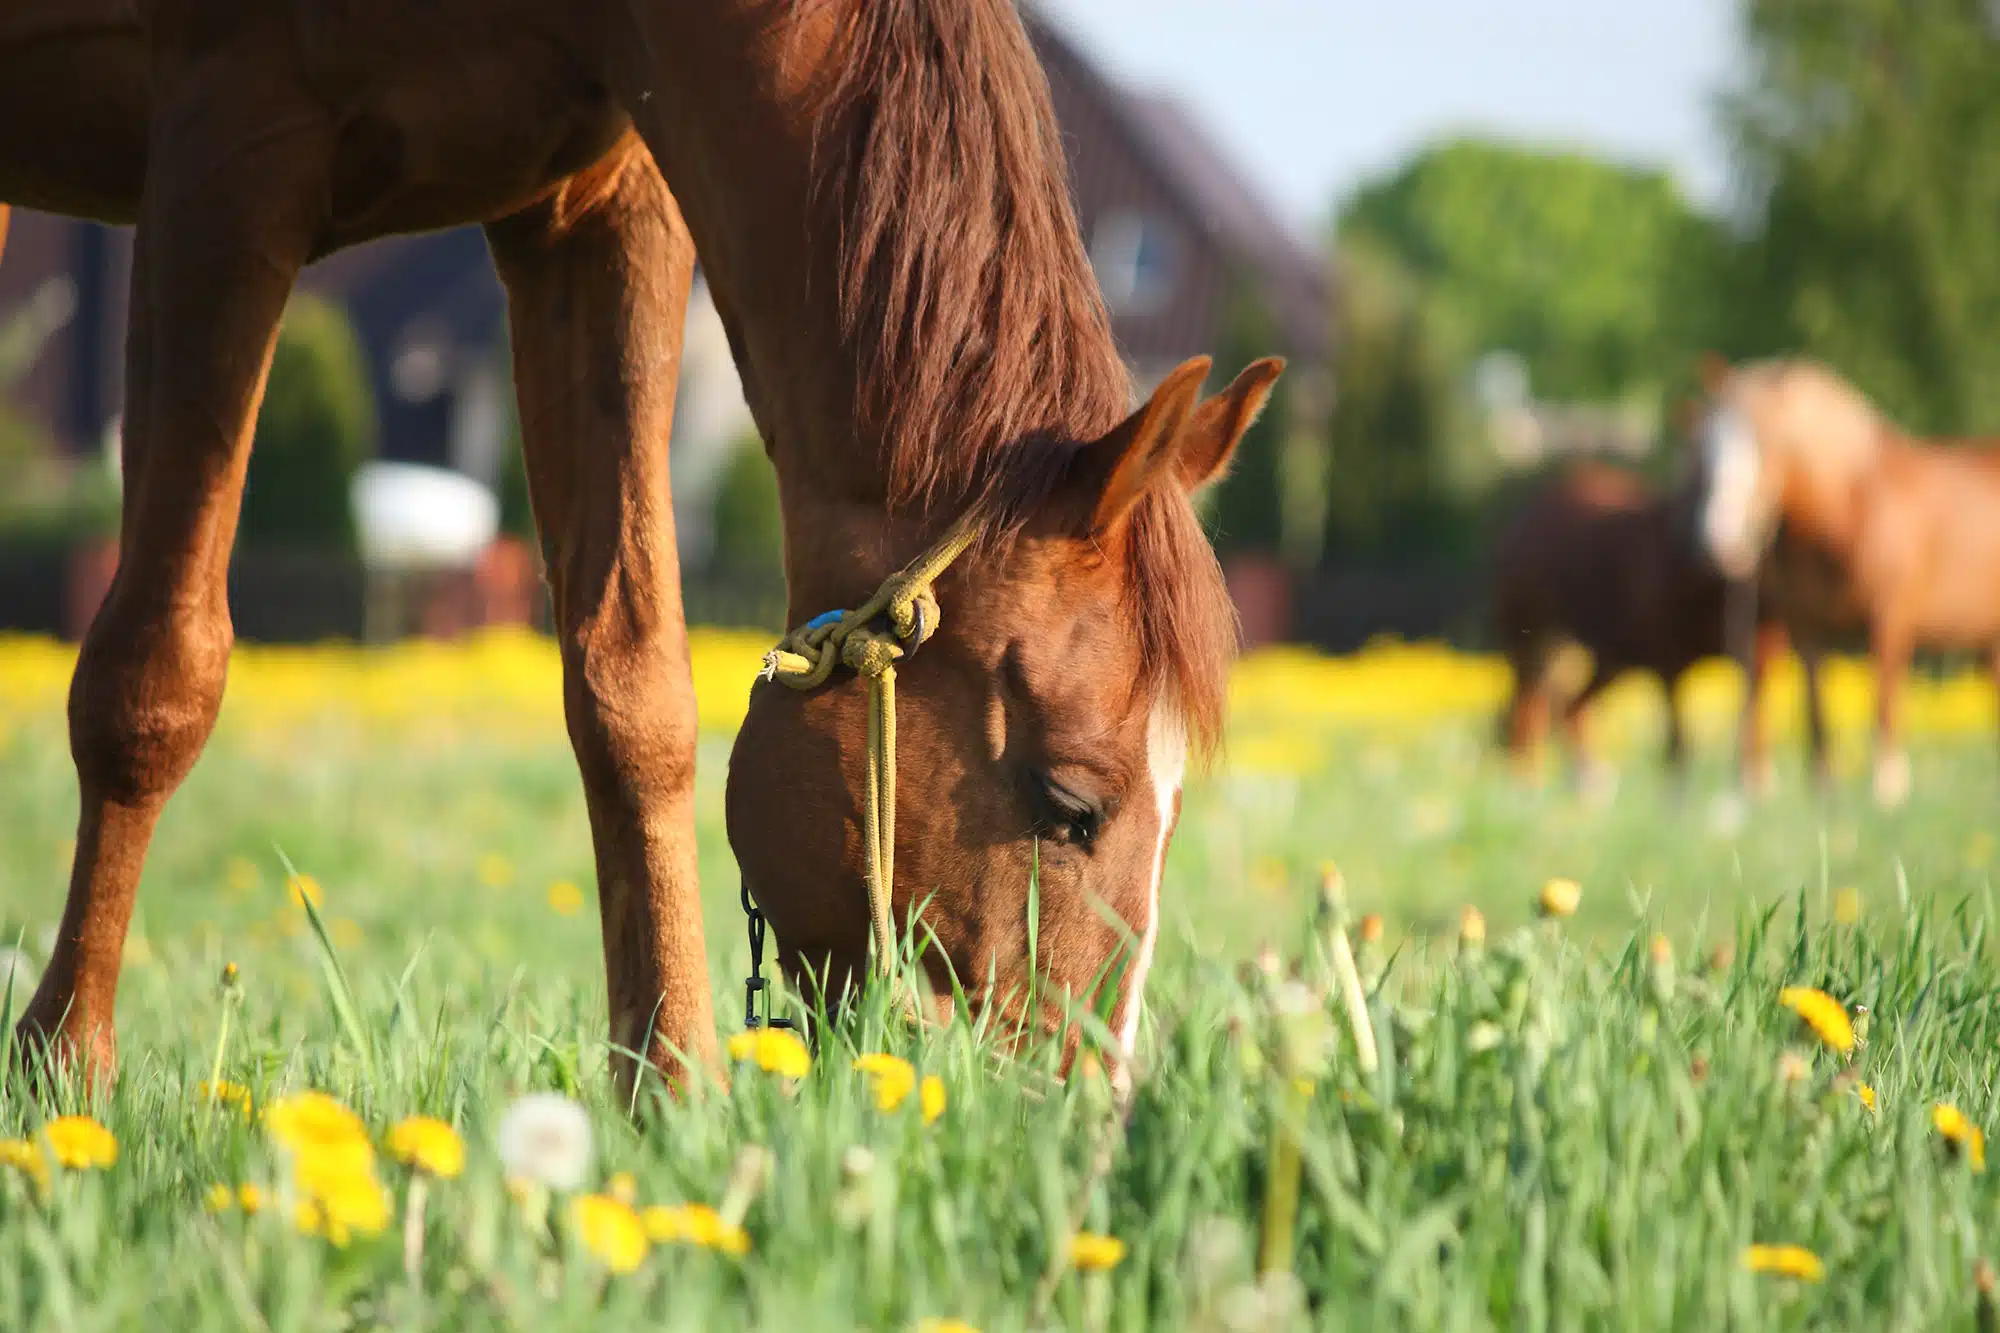 Chestnut horse eating grass in a field